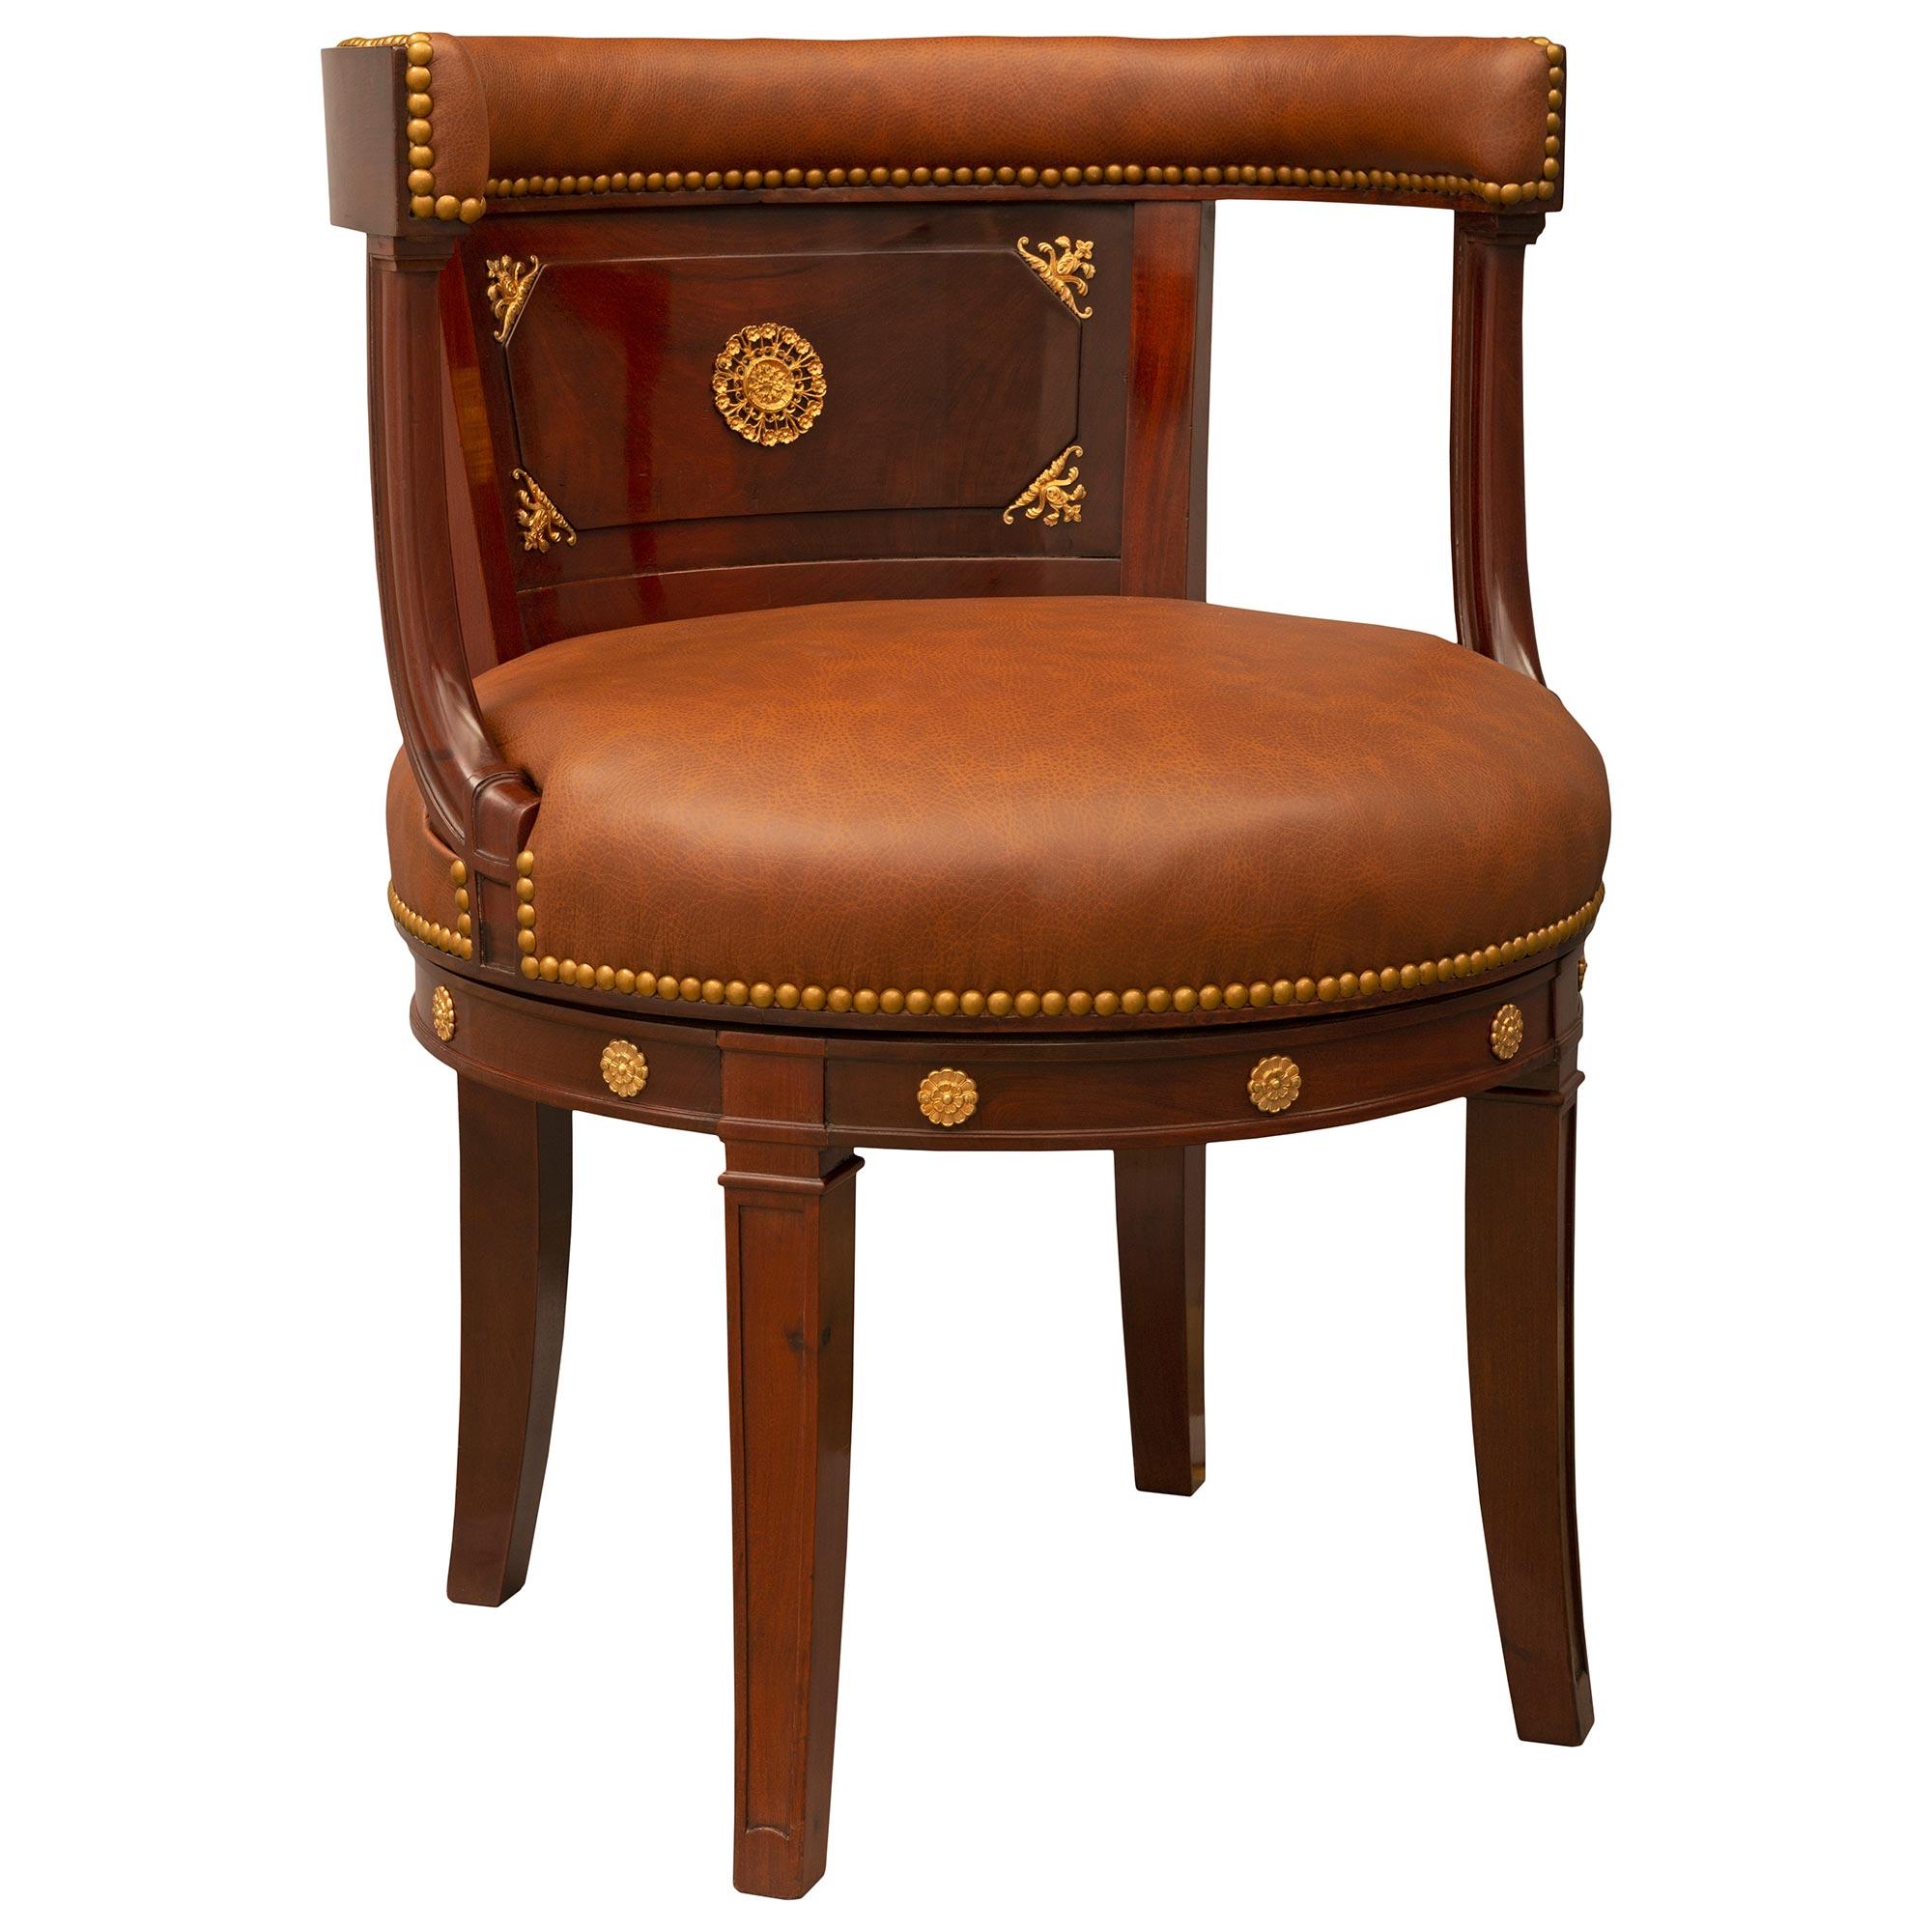 French 19th Century Empire St. Mahogany and Ormolu Desk Armchair In Good Condition For Sale In West Palm Beach, FL